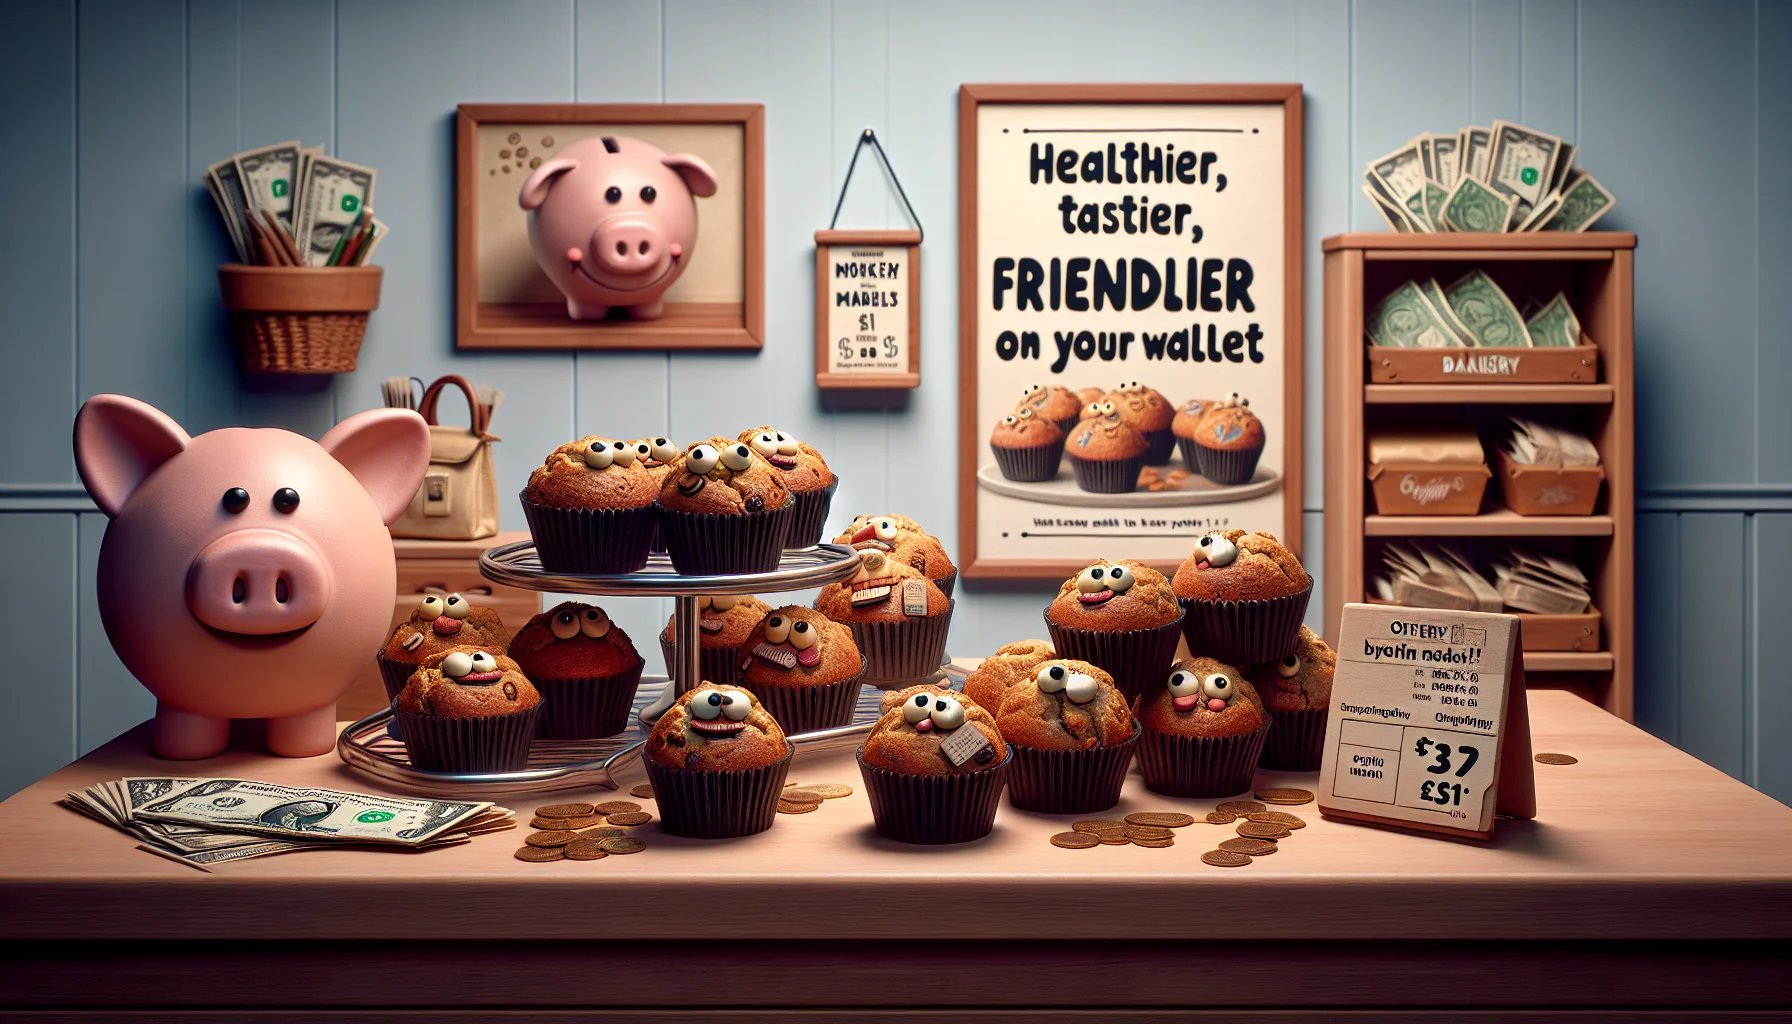 Create a hyperrealistic still-life image of a delightful scene that leaves viewers chuckling lightly to themselves. In the middle of the scene, a group of appetizing, vegan oat muffins stare tantalizingly at the viewer from an inviting bakery display case. They're labelled with a small, cheeky sign that reads 'healthier, tastier, friendlier on your wallet'. Surrounding this, add background details implying an exaggerated frugality: a piggy bank with a triumphant smirk, a wallet overflowing with dollar bills, and a price tag showing a surprisingly low cost. This wholesome, humorous scene invites viewers towards a healthier, more affordable lifestyle whilst promoting plant-based indulgence.